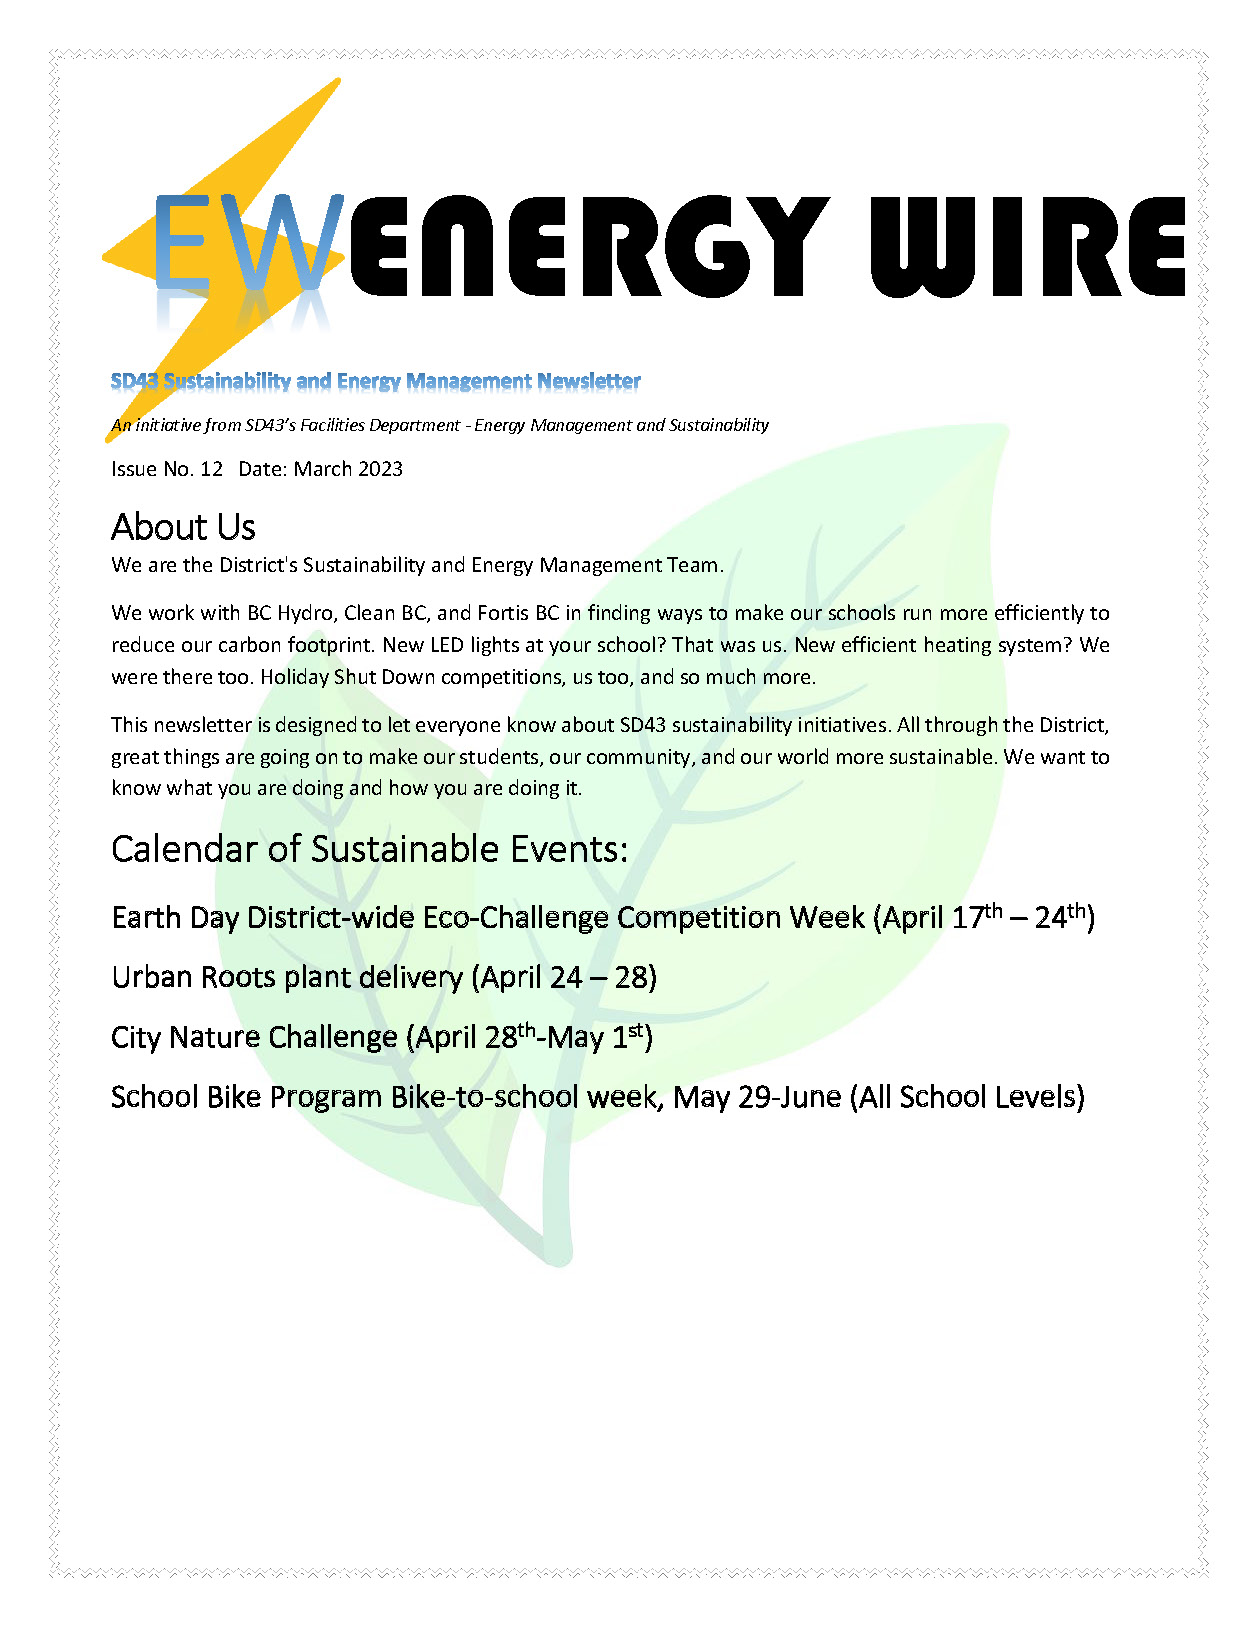 Energy Wire Newsletter March 2023_Page_1.jpg